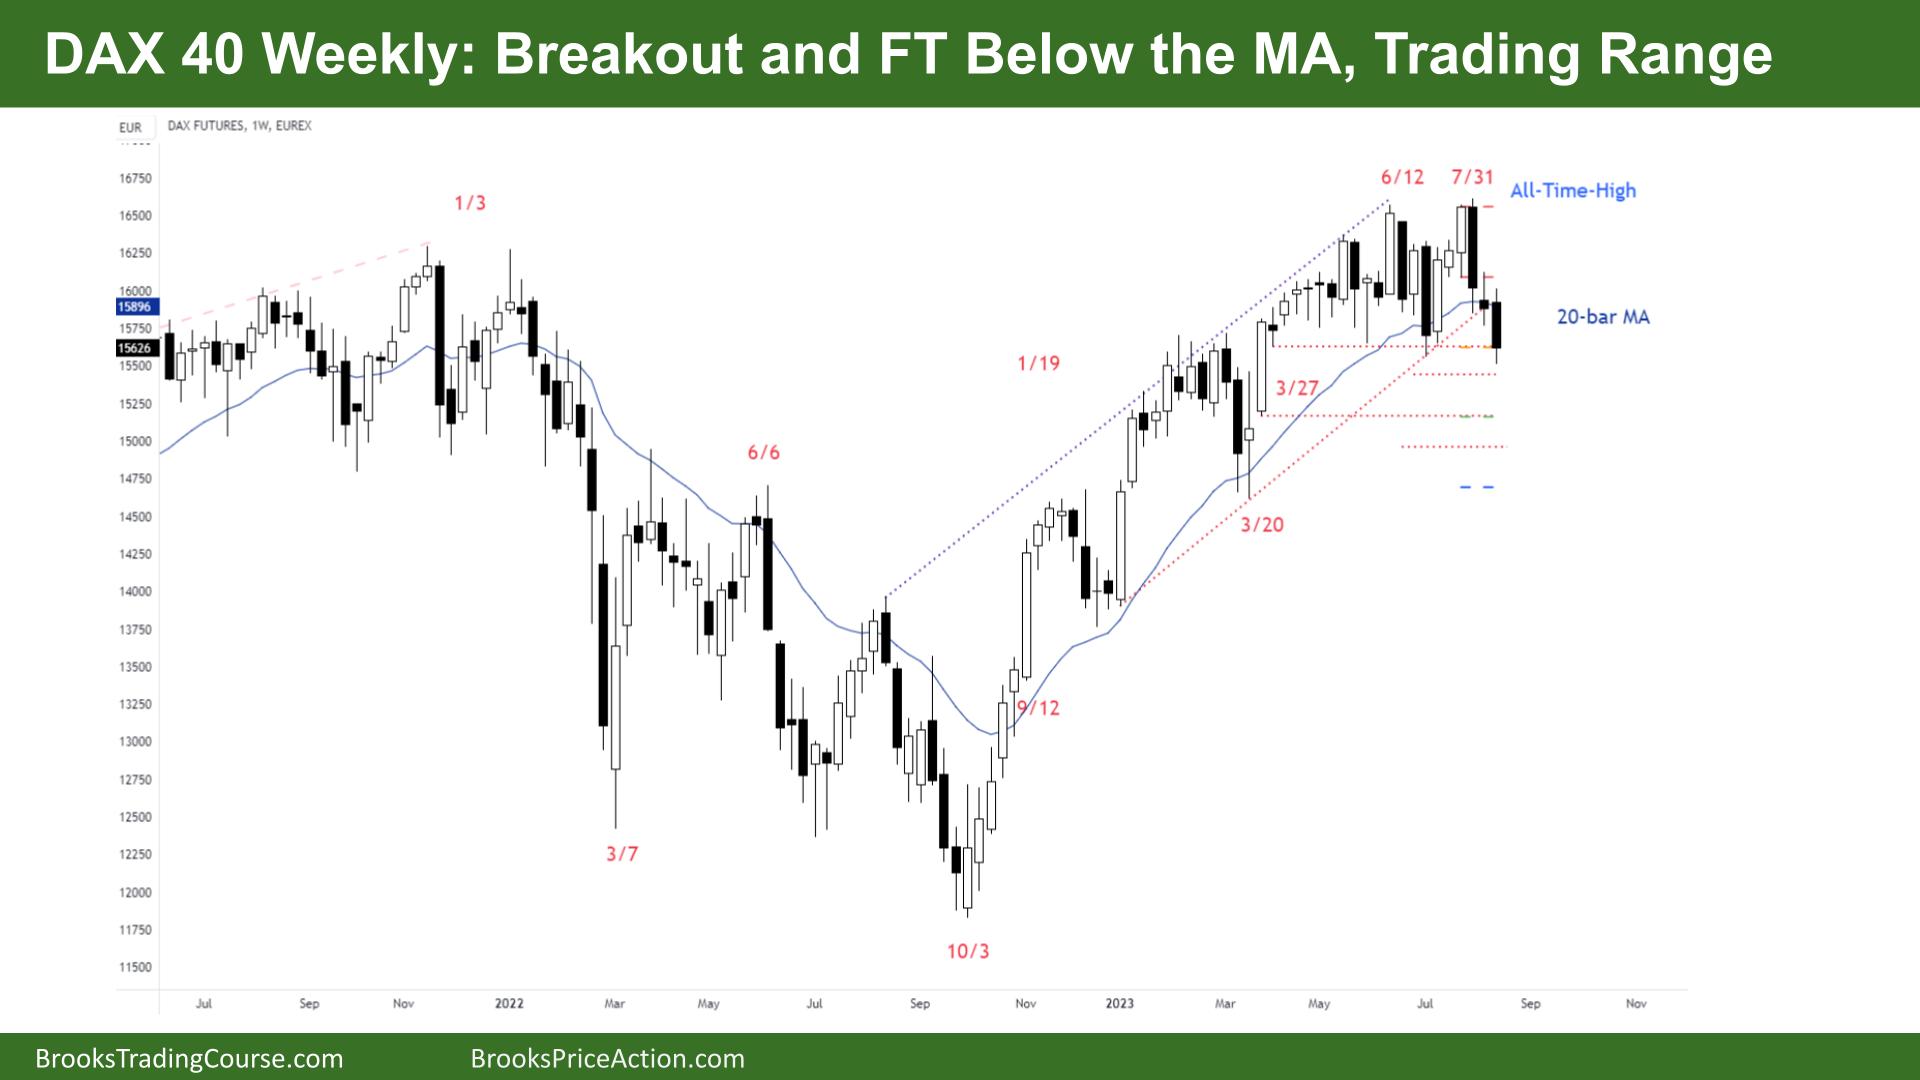 DAX 40 Breakout and FT Below the MA, Trading Range